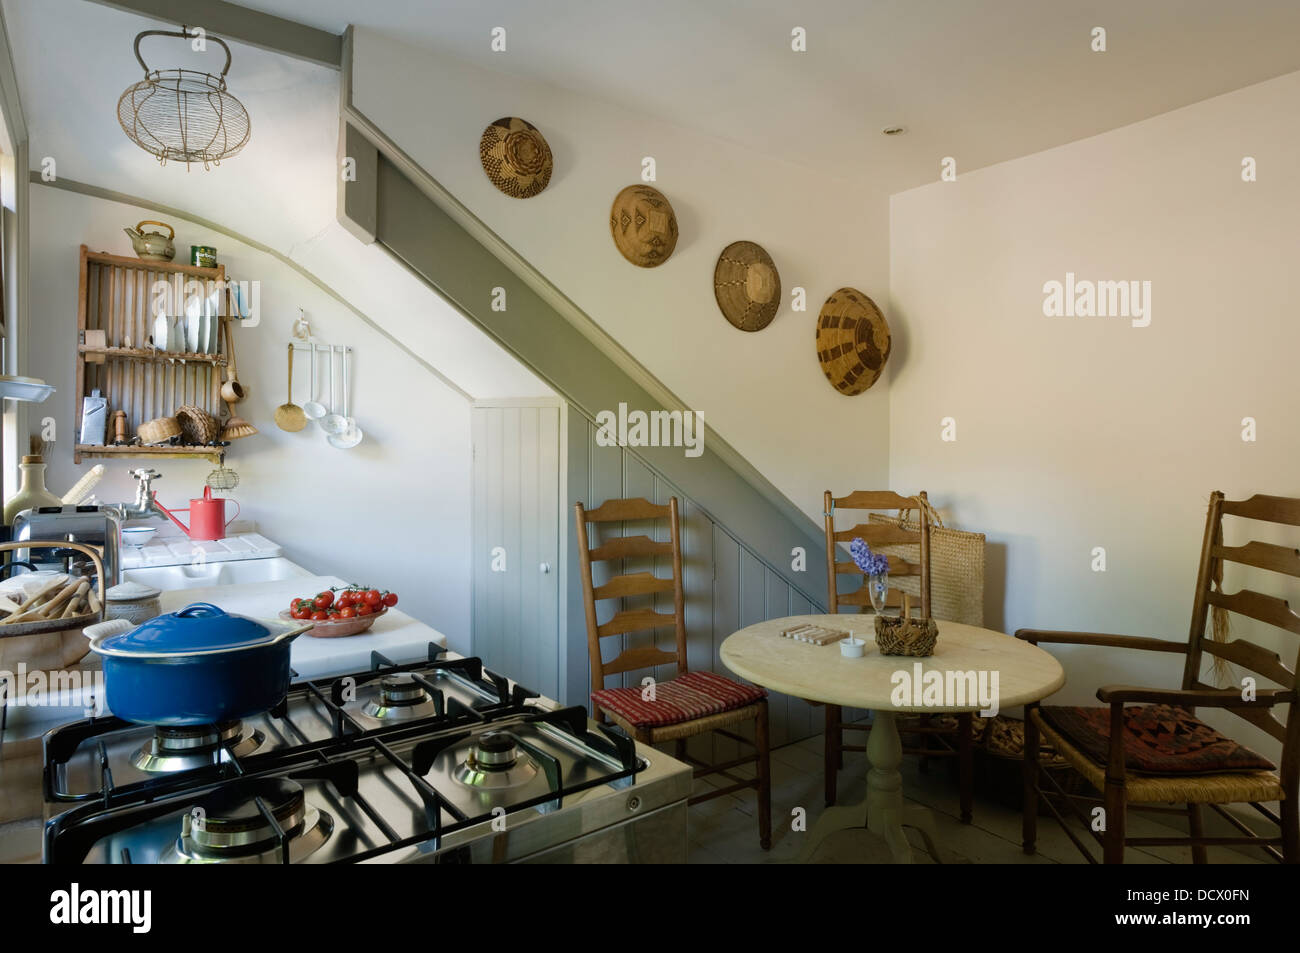 Ladderback chairs and storage cupboards in kitchen with plate rack and collection of African bowls Stock Photo